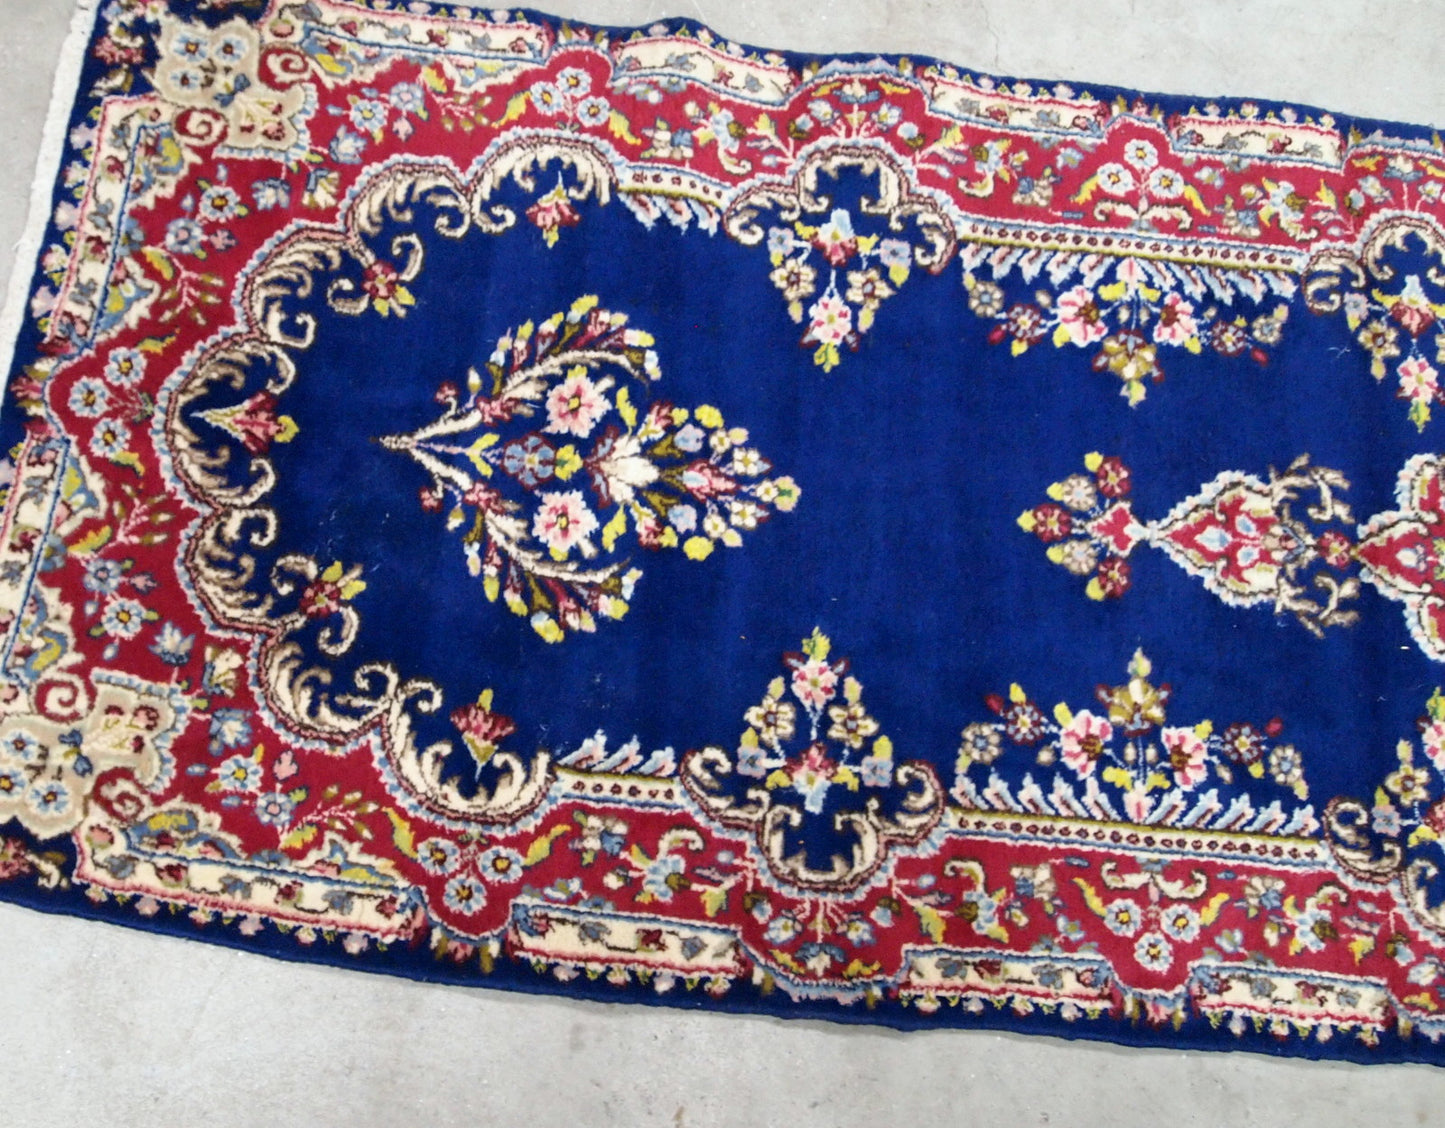 Handmade antique Persian Kerman runner in bright blue and red wool. The runner is from the middle of 20th century in original good condition.